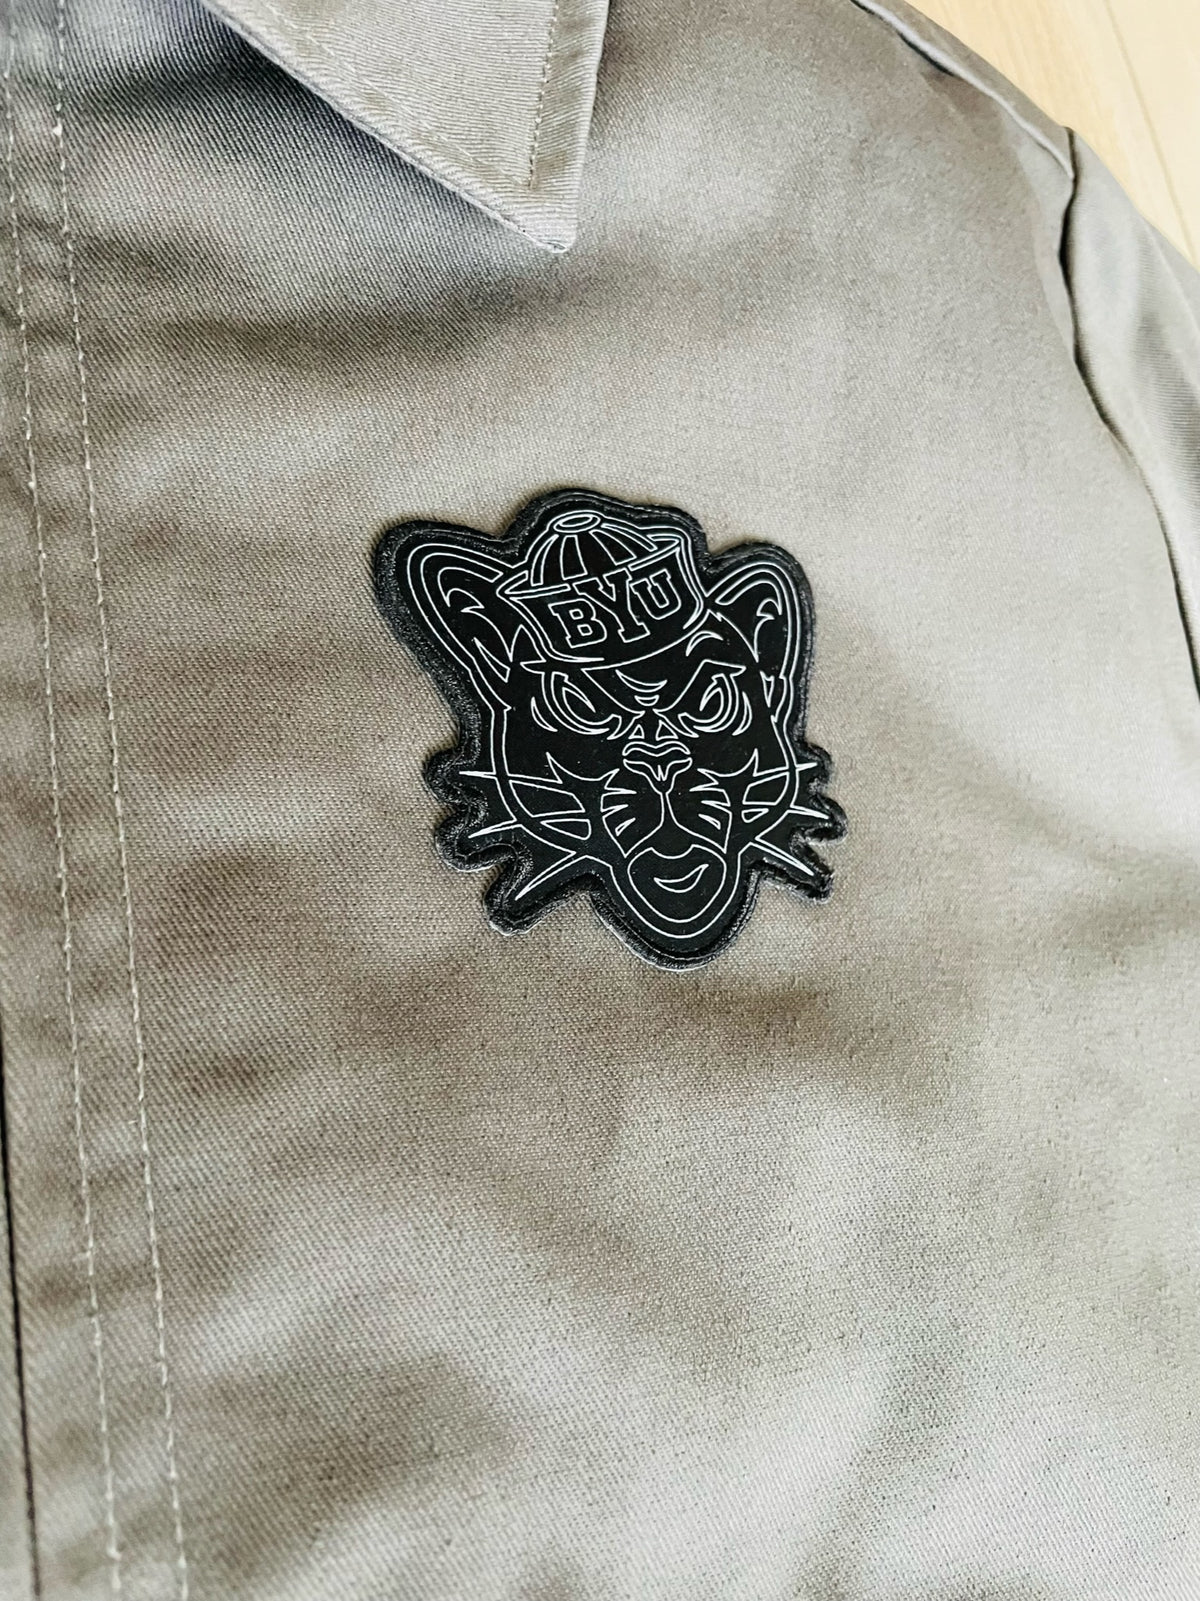 Gray Mechanics Jacket with Custom Black and White BYU Sailor Cougar Patch